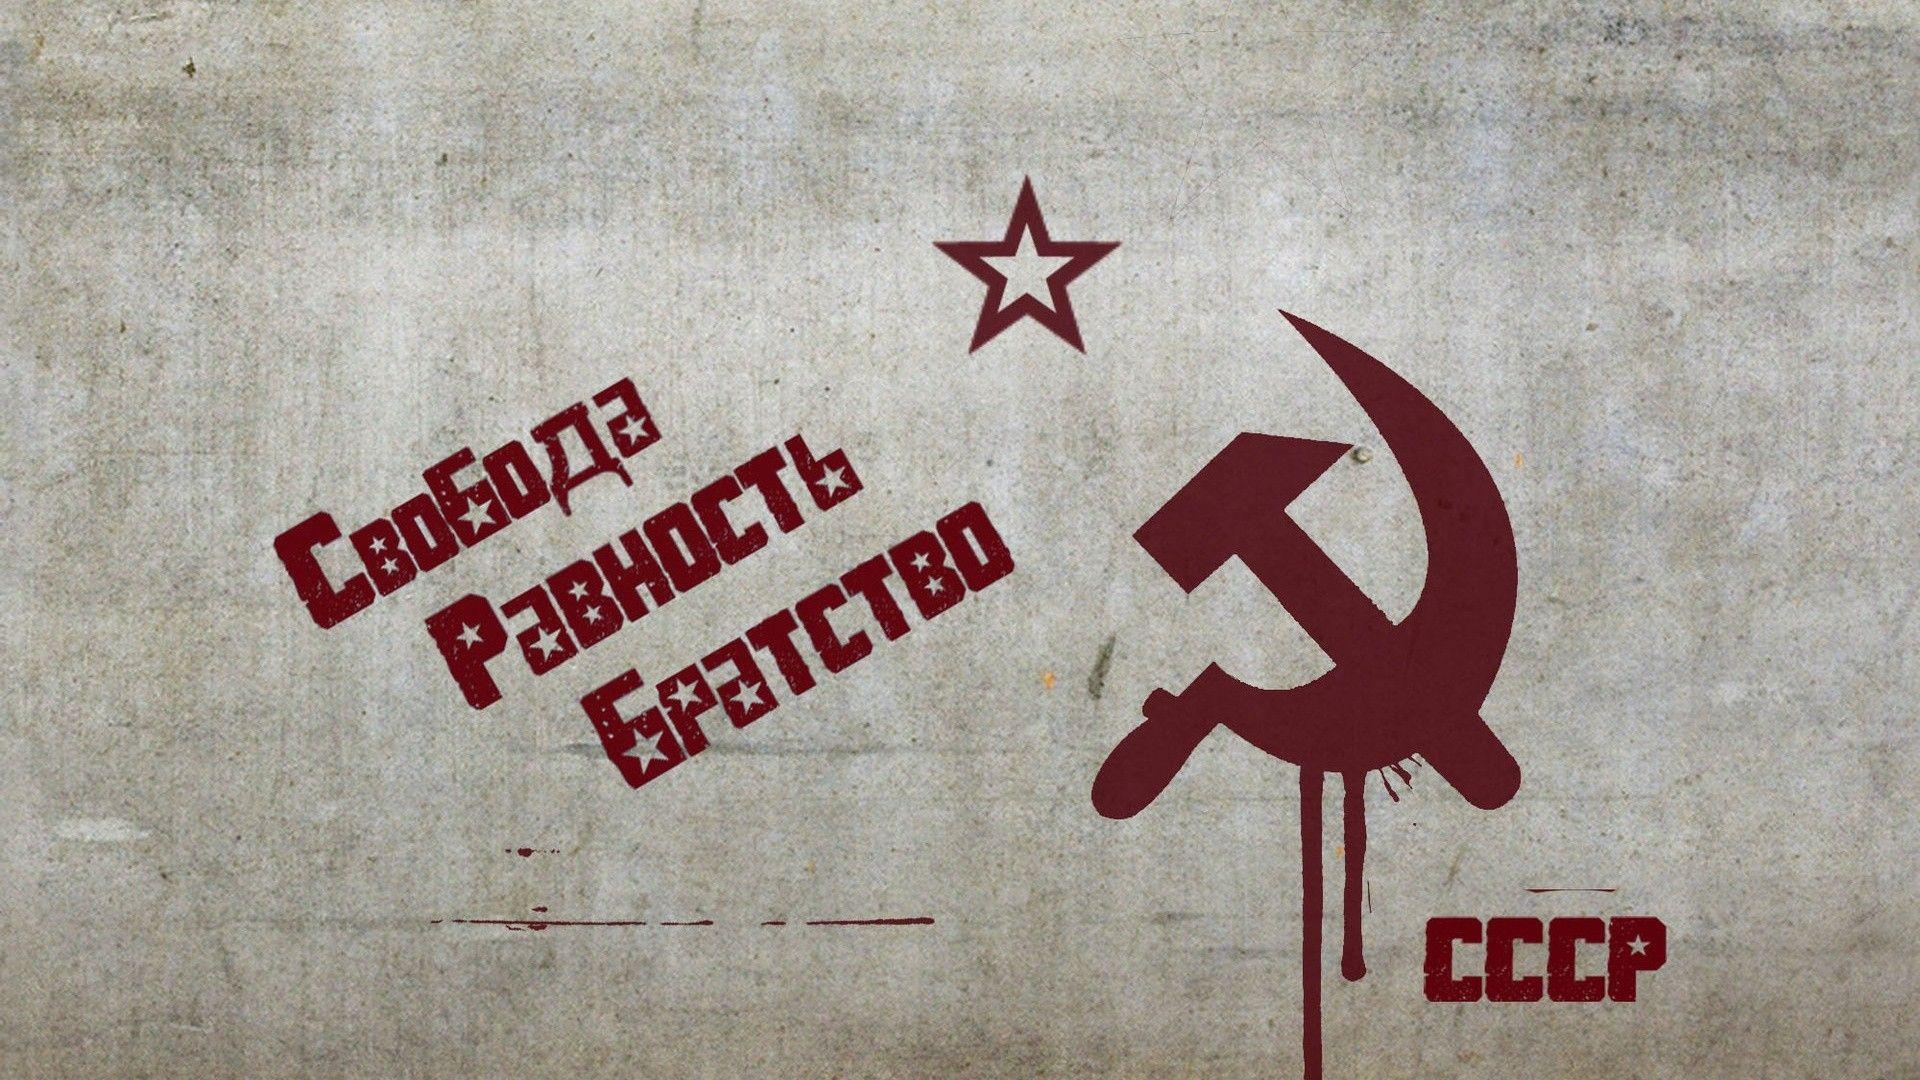 The USSR is the freedom, equality, fraternity. Android wallpaper